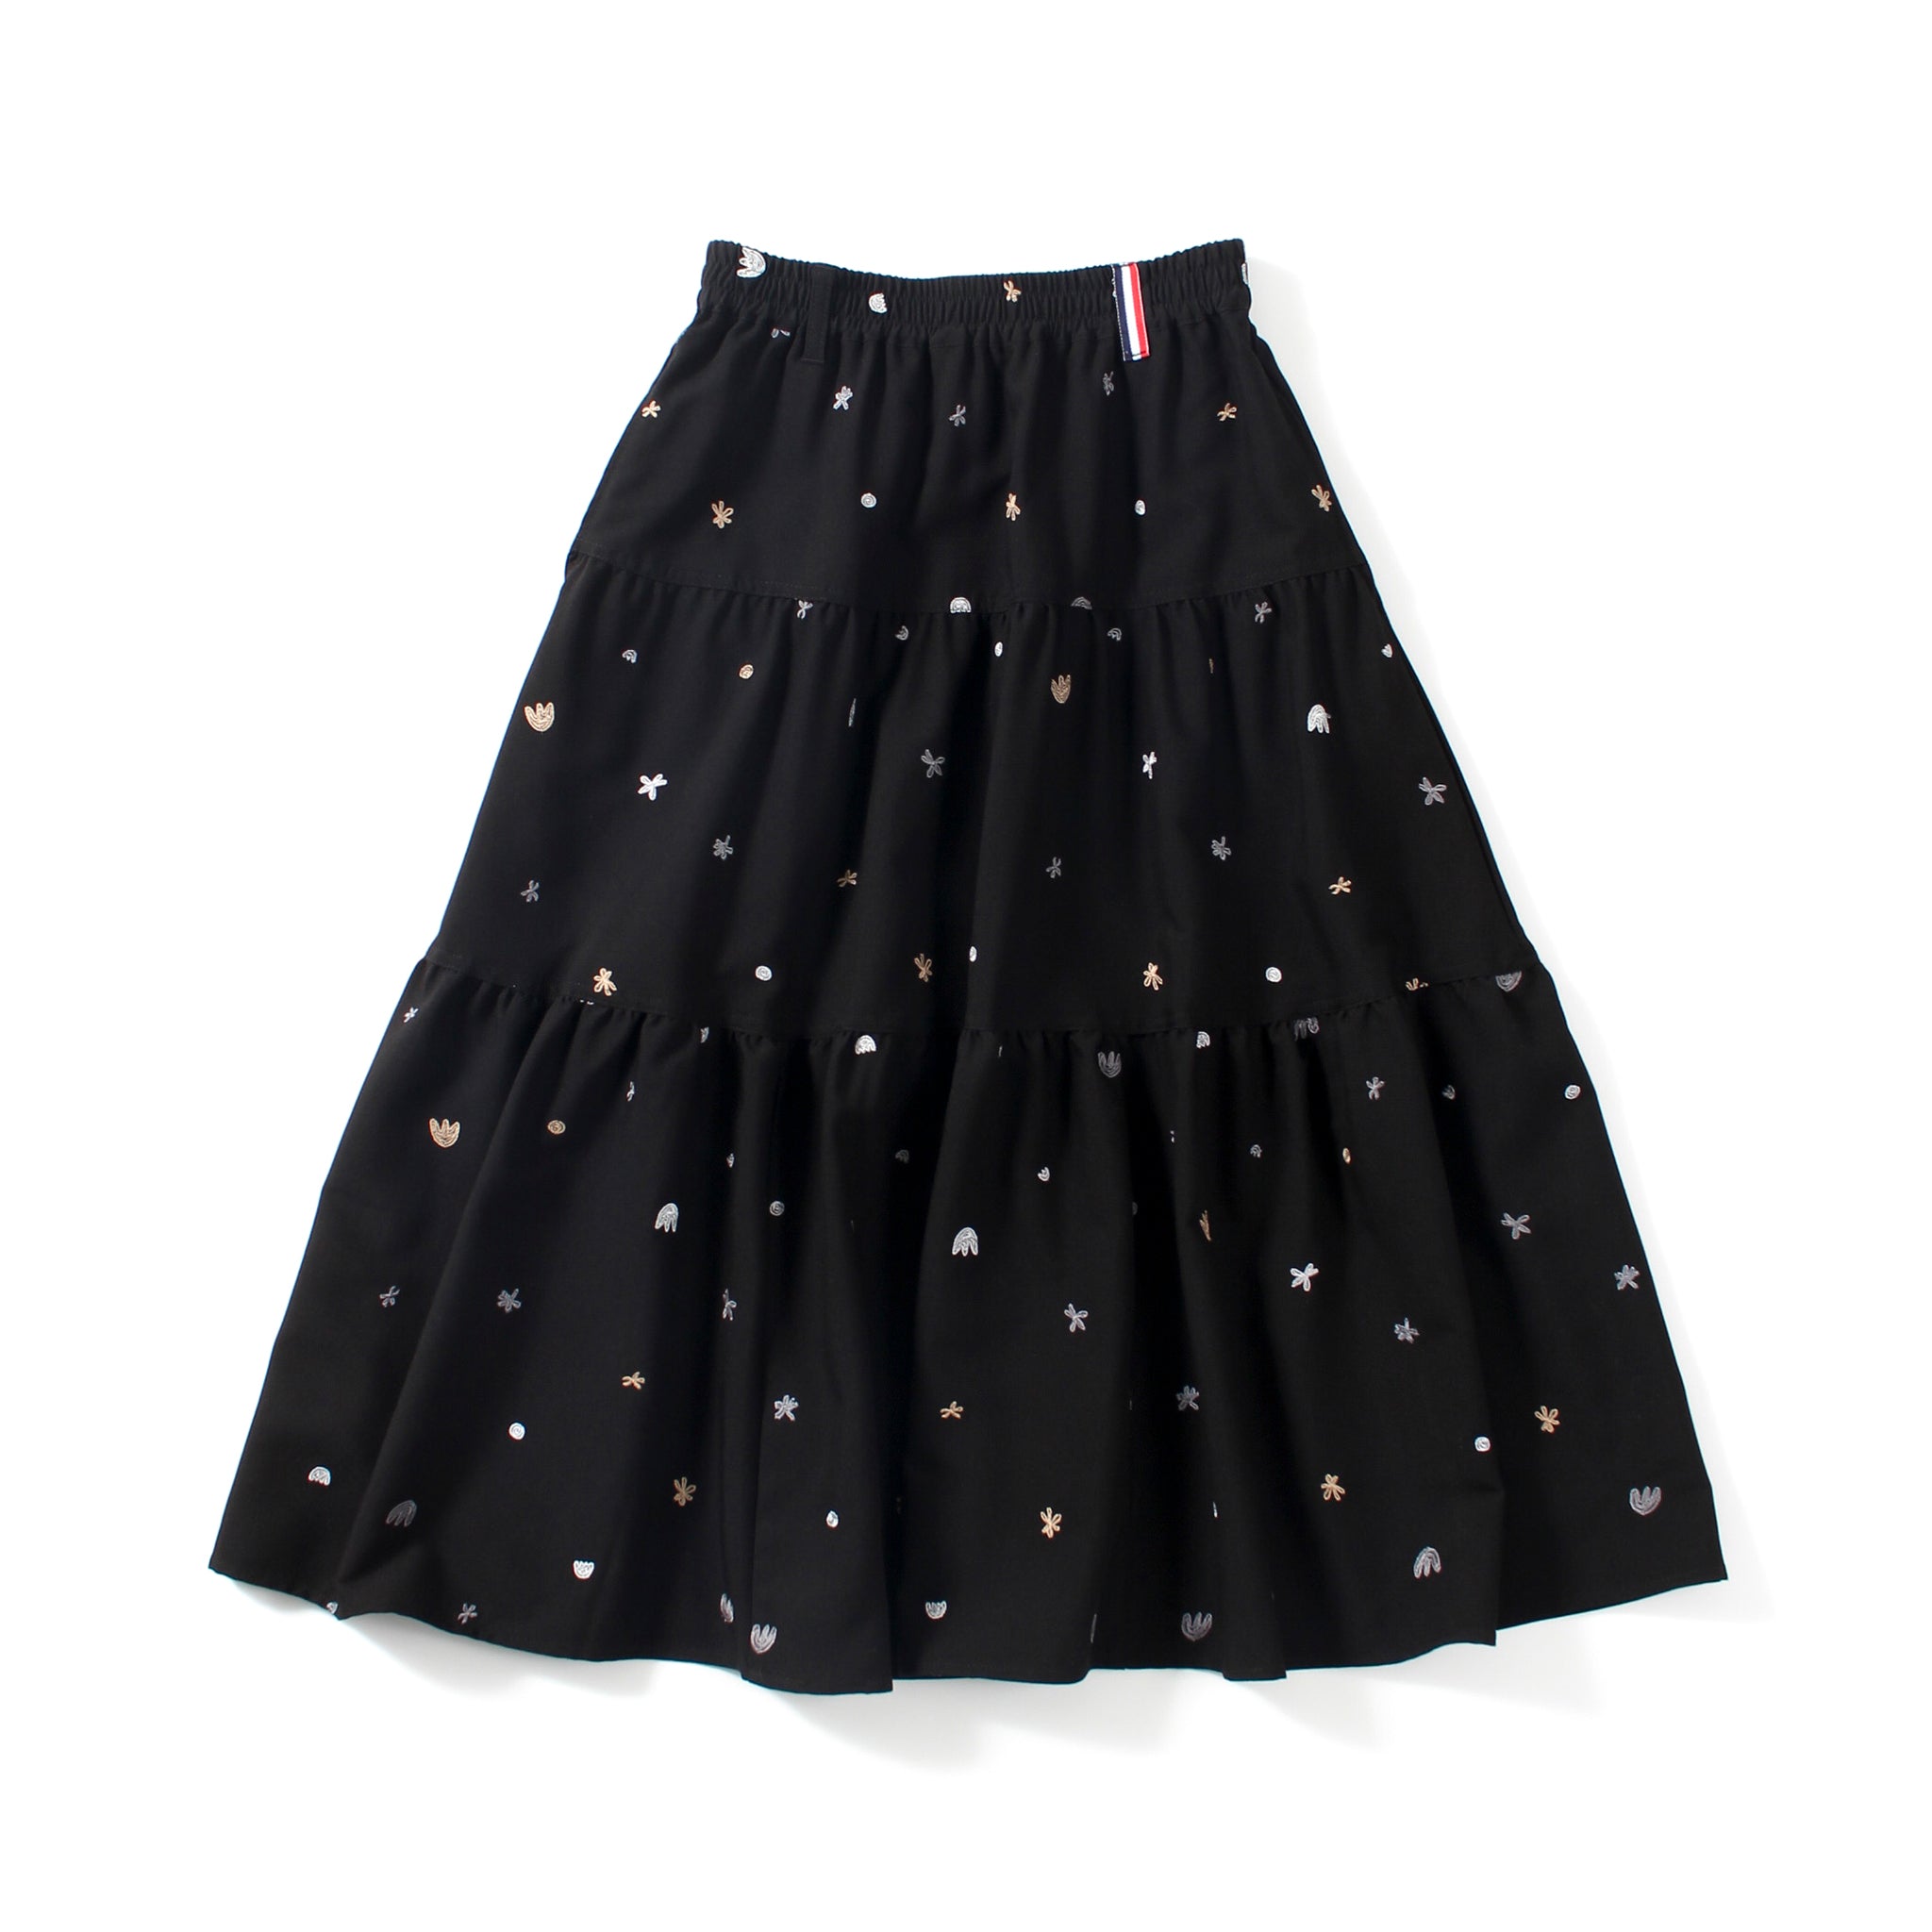 embroidery skirt